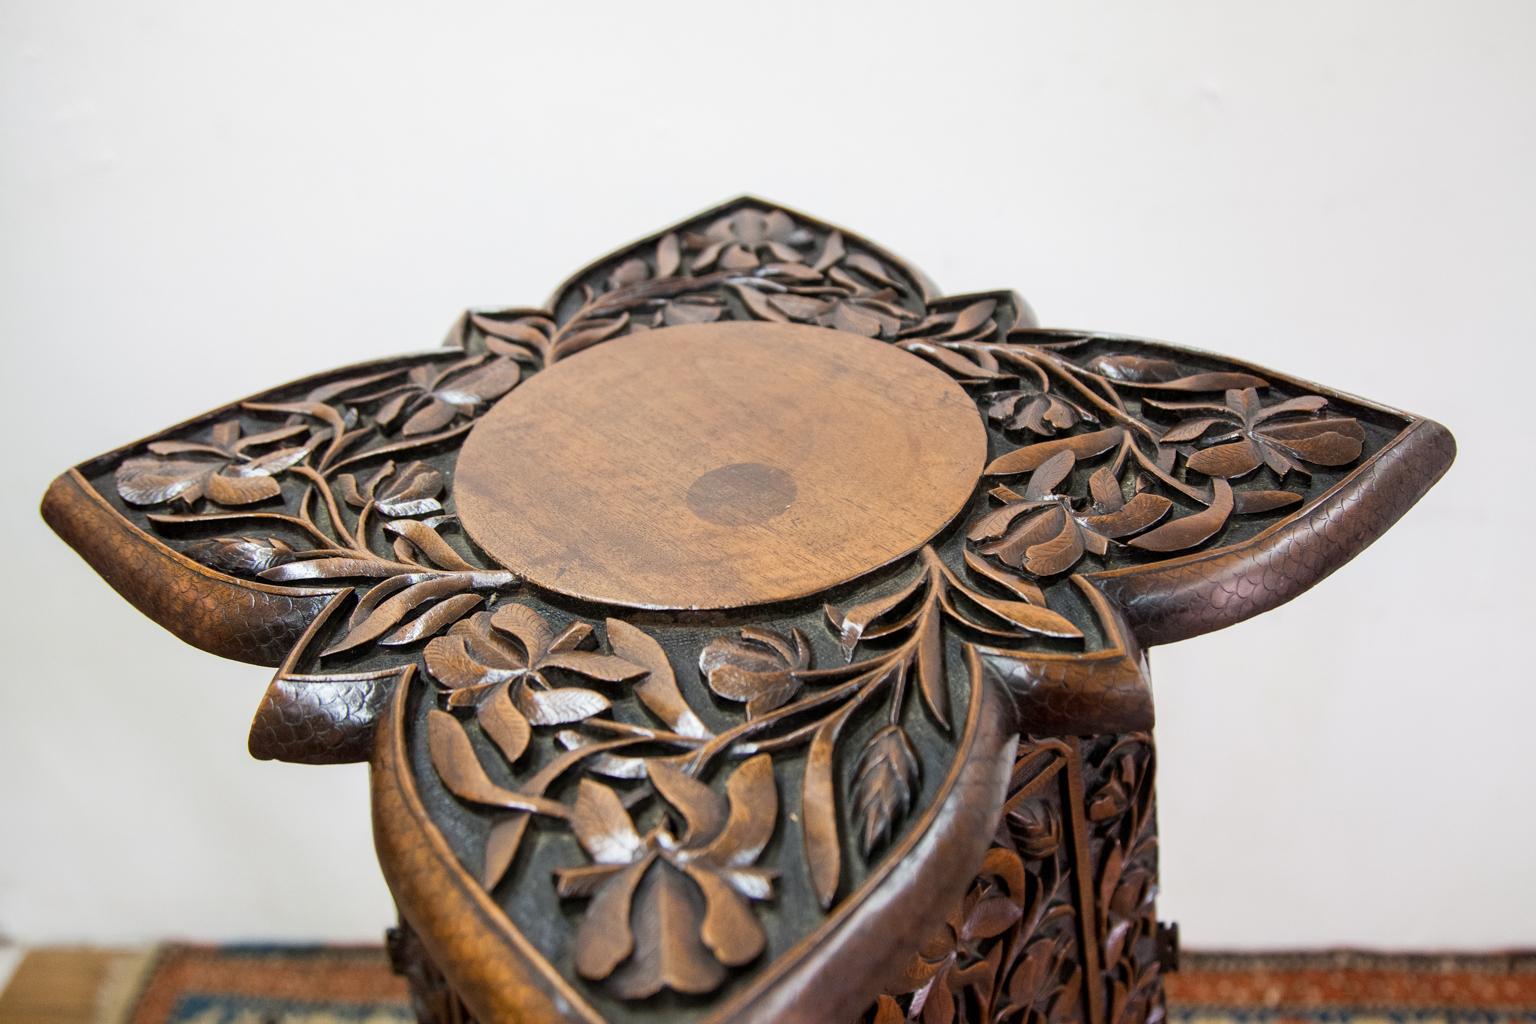 Walnut carved plant stand has floral leaf and vine designs on all sides carved in high relief. There is carved fish scale molding on the top.